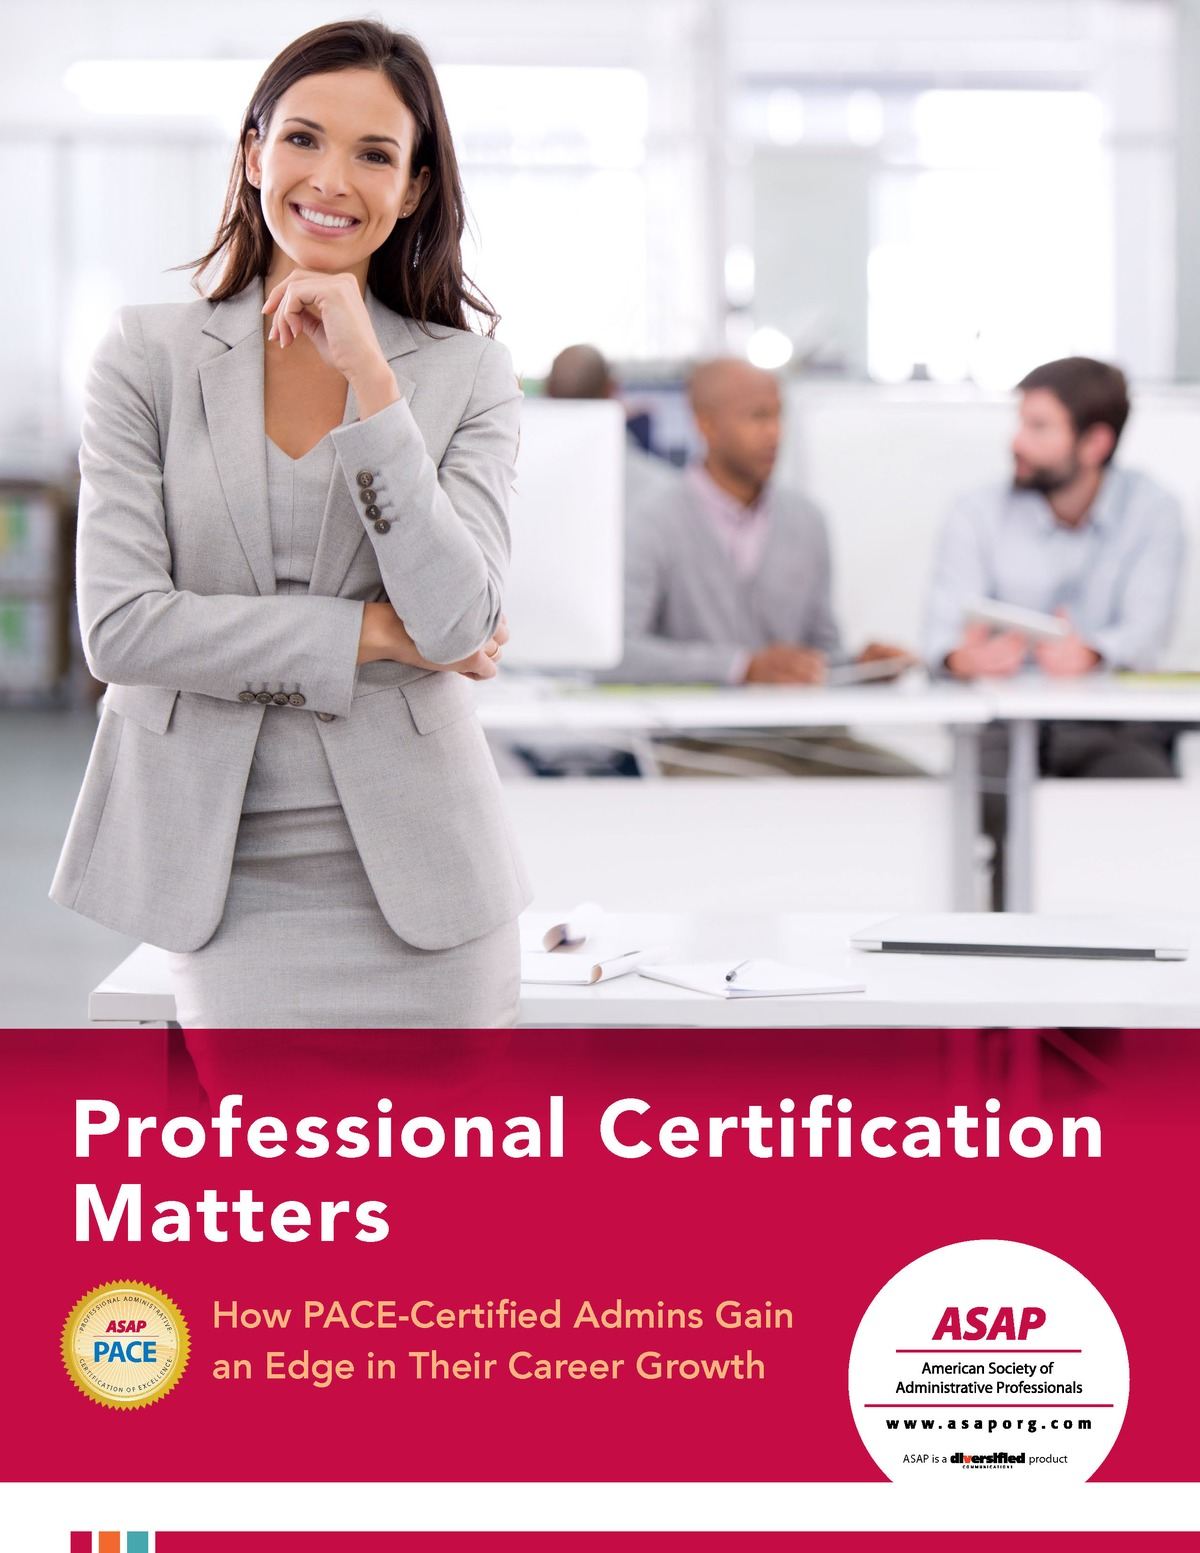 Professional Certification Matters Product The American Society of